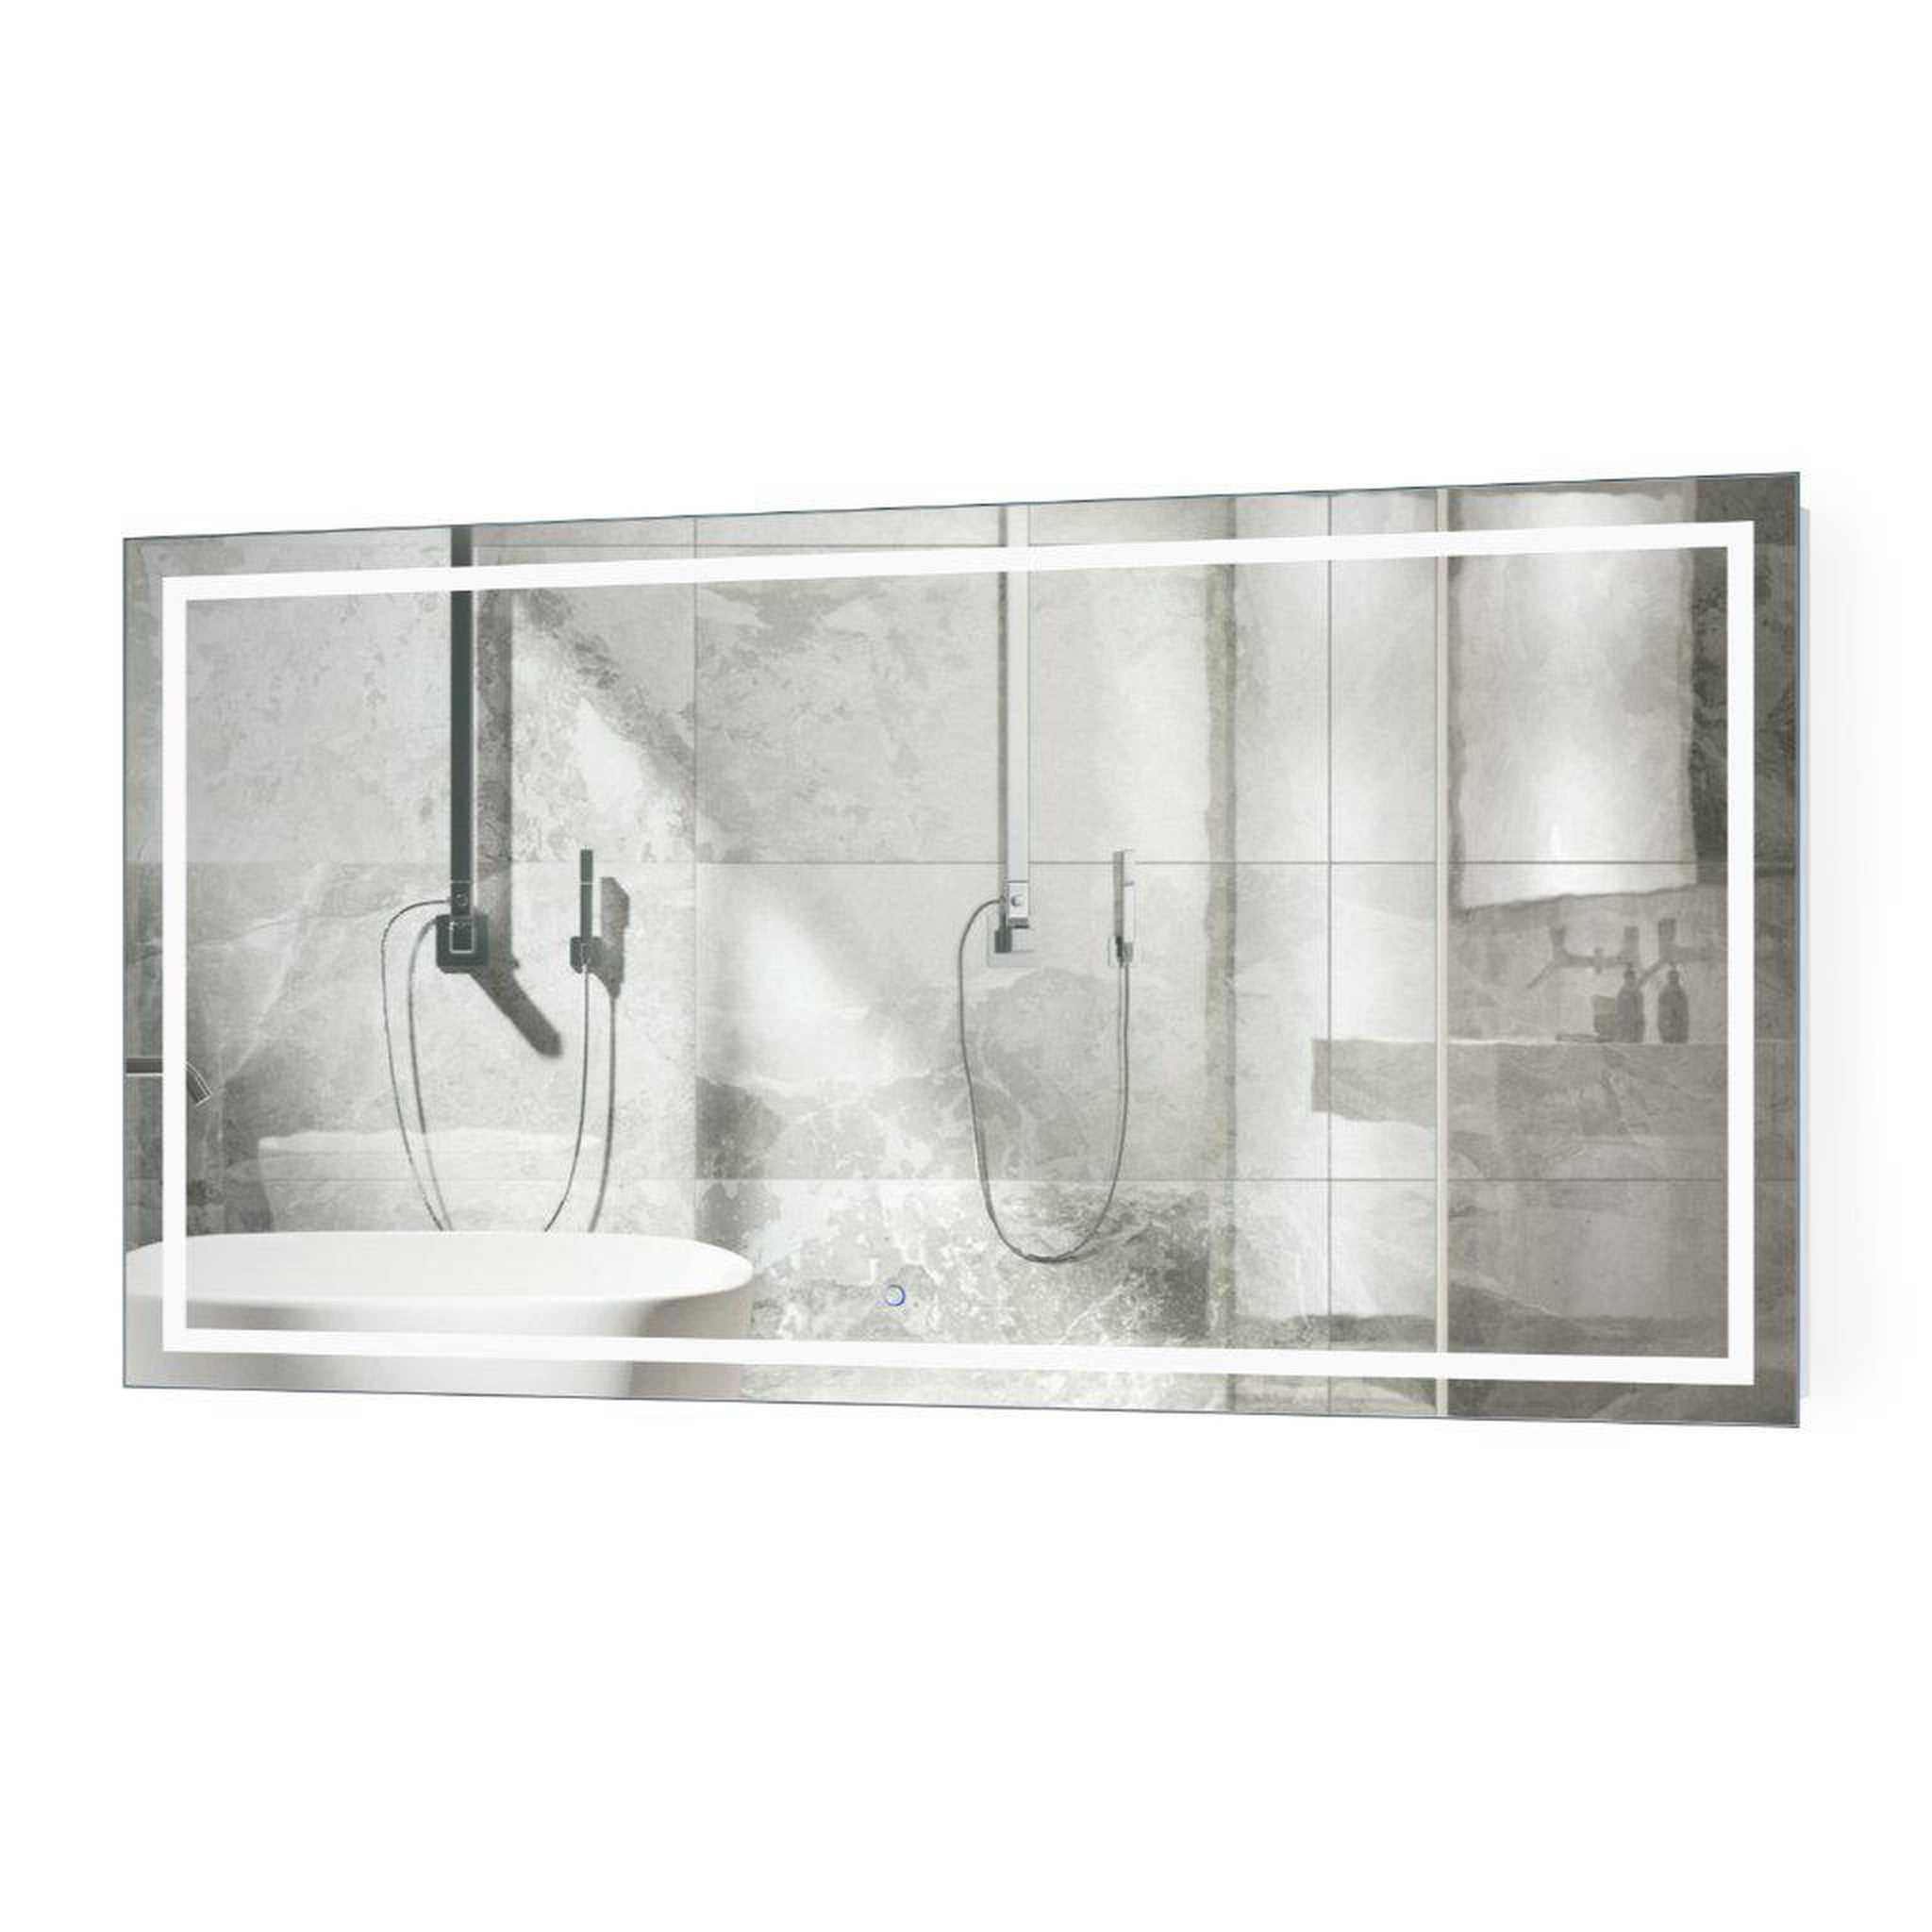 Krugg Reflections, Krugg Reflections Icon 66” x 36” 5000K Rectangular Wall-Mounted Illuminated Silver Backed LED Mirror With Built-in Defogger and Touch Sensor On/Off Built-in Dimmer